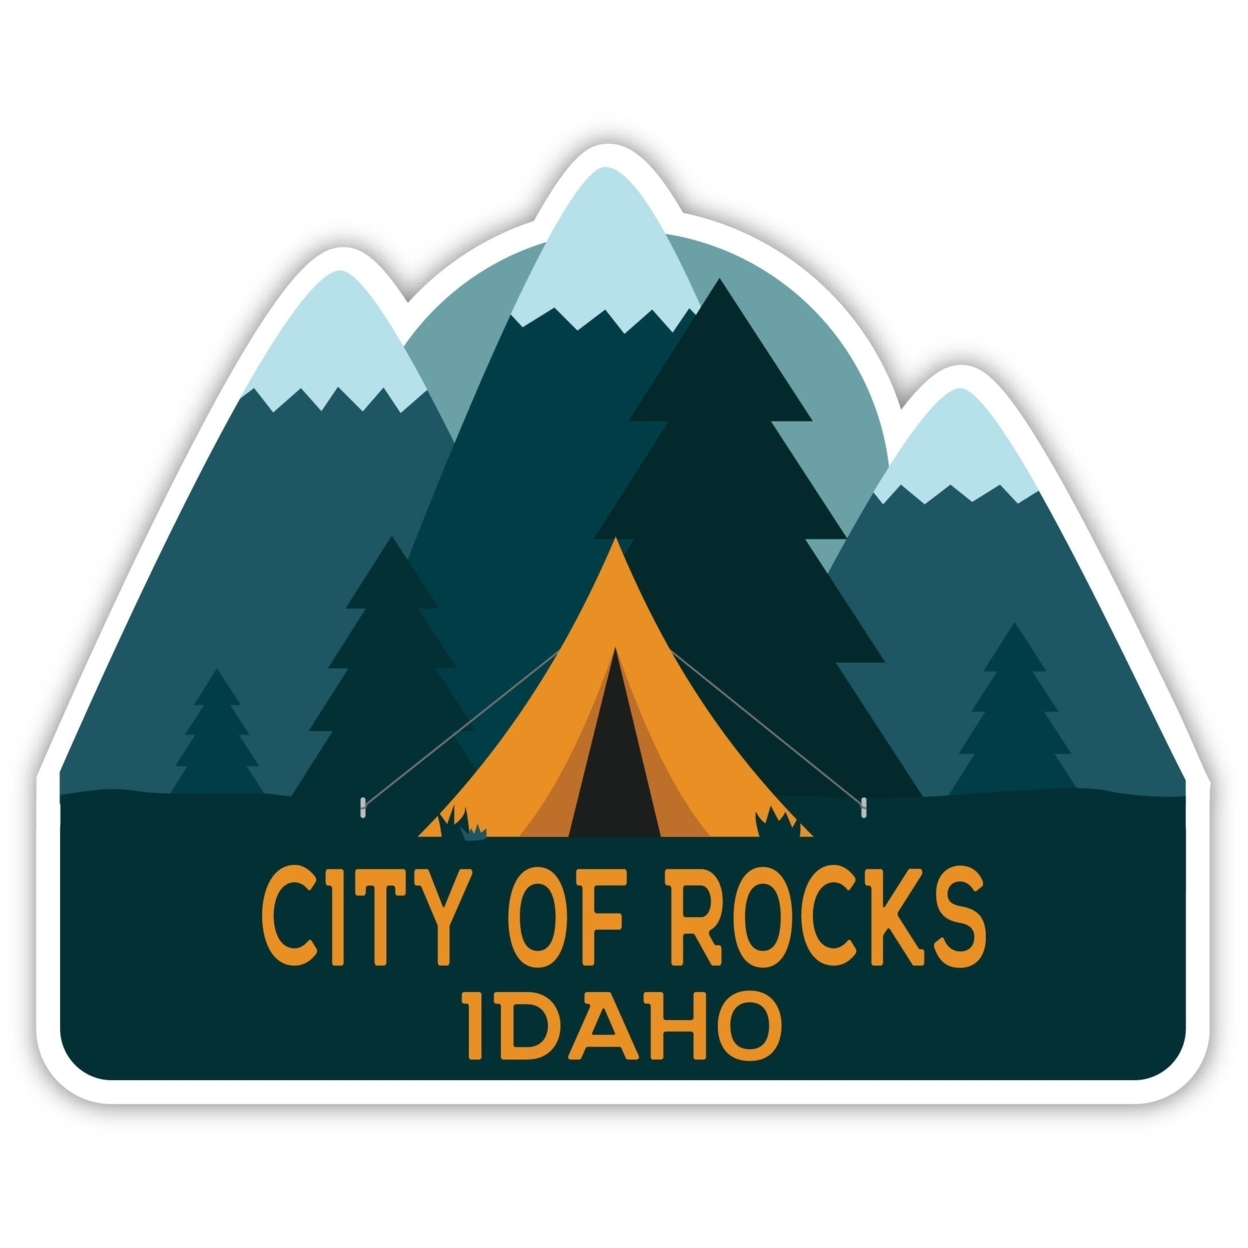 City Of Rocks Idaho Souvenir Decorative Stickers (Choose Theme And Size) - 4-Pack, 4-Inch, Tent